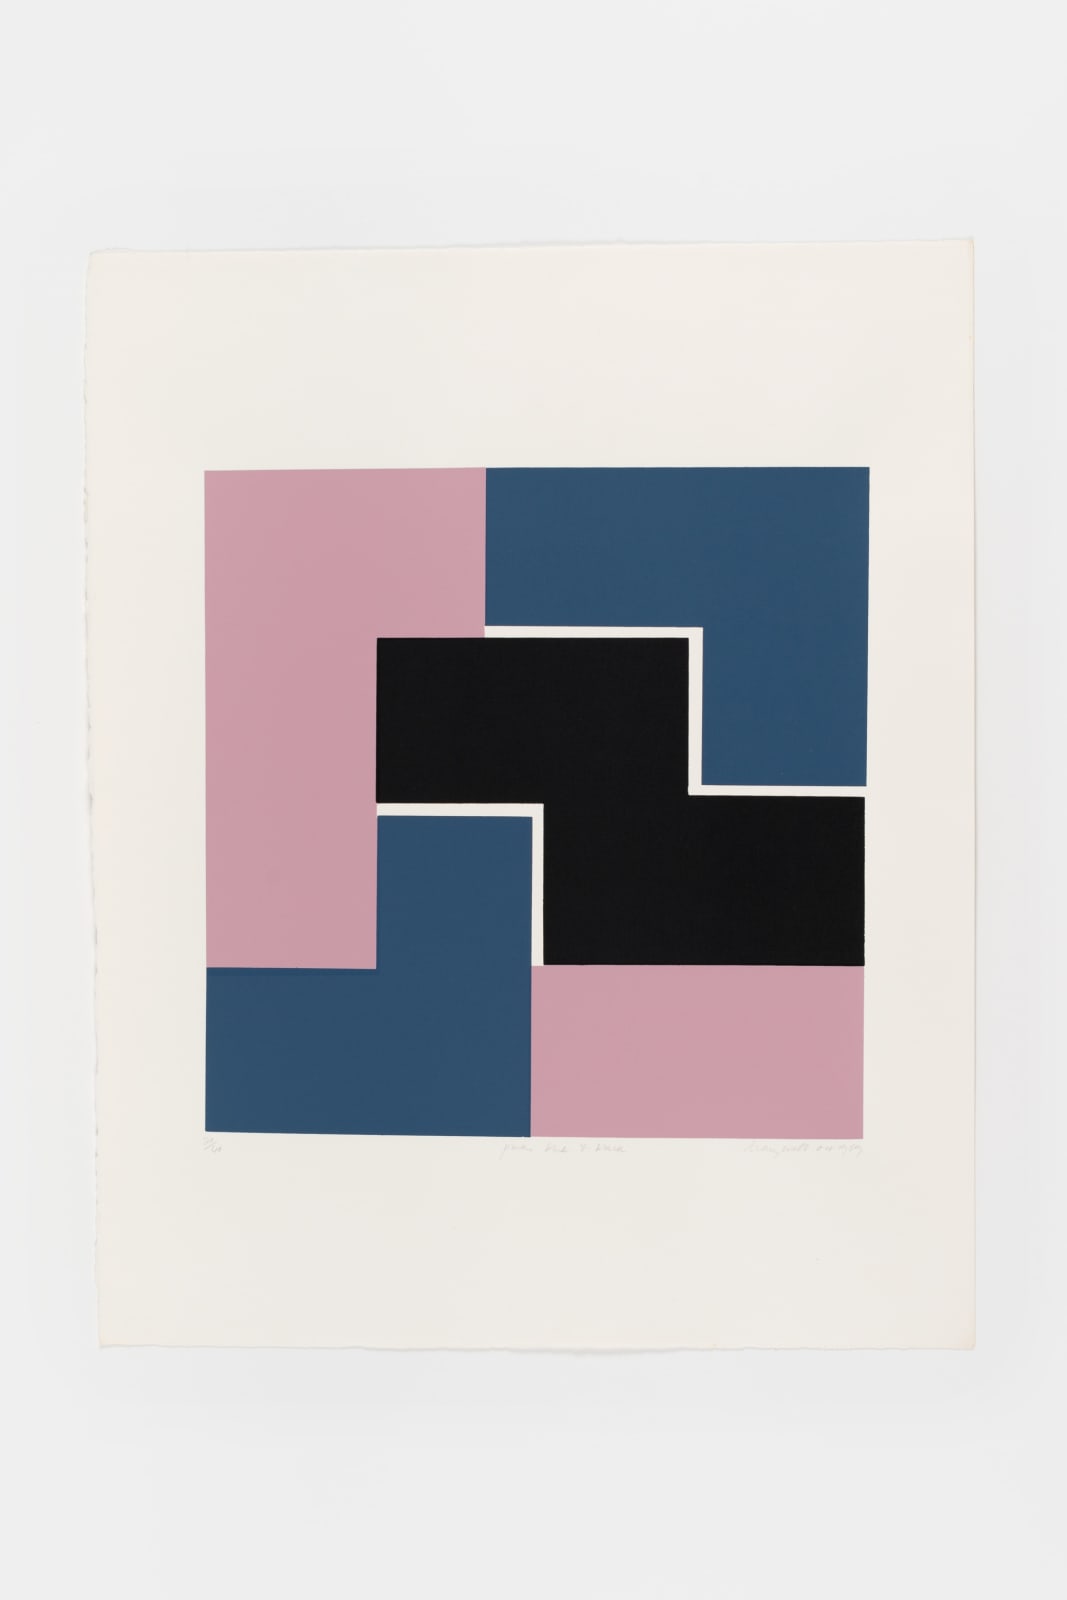 Mary Webb, Pink, blue and black, 1969